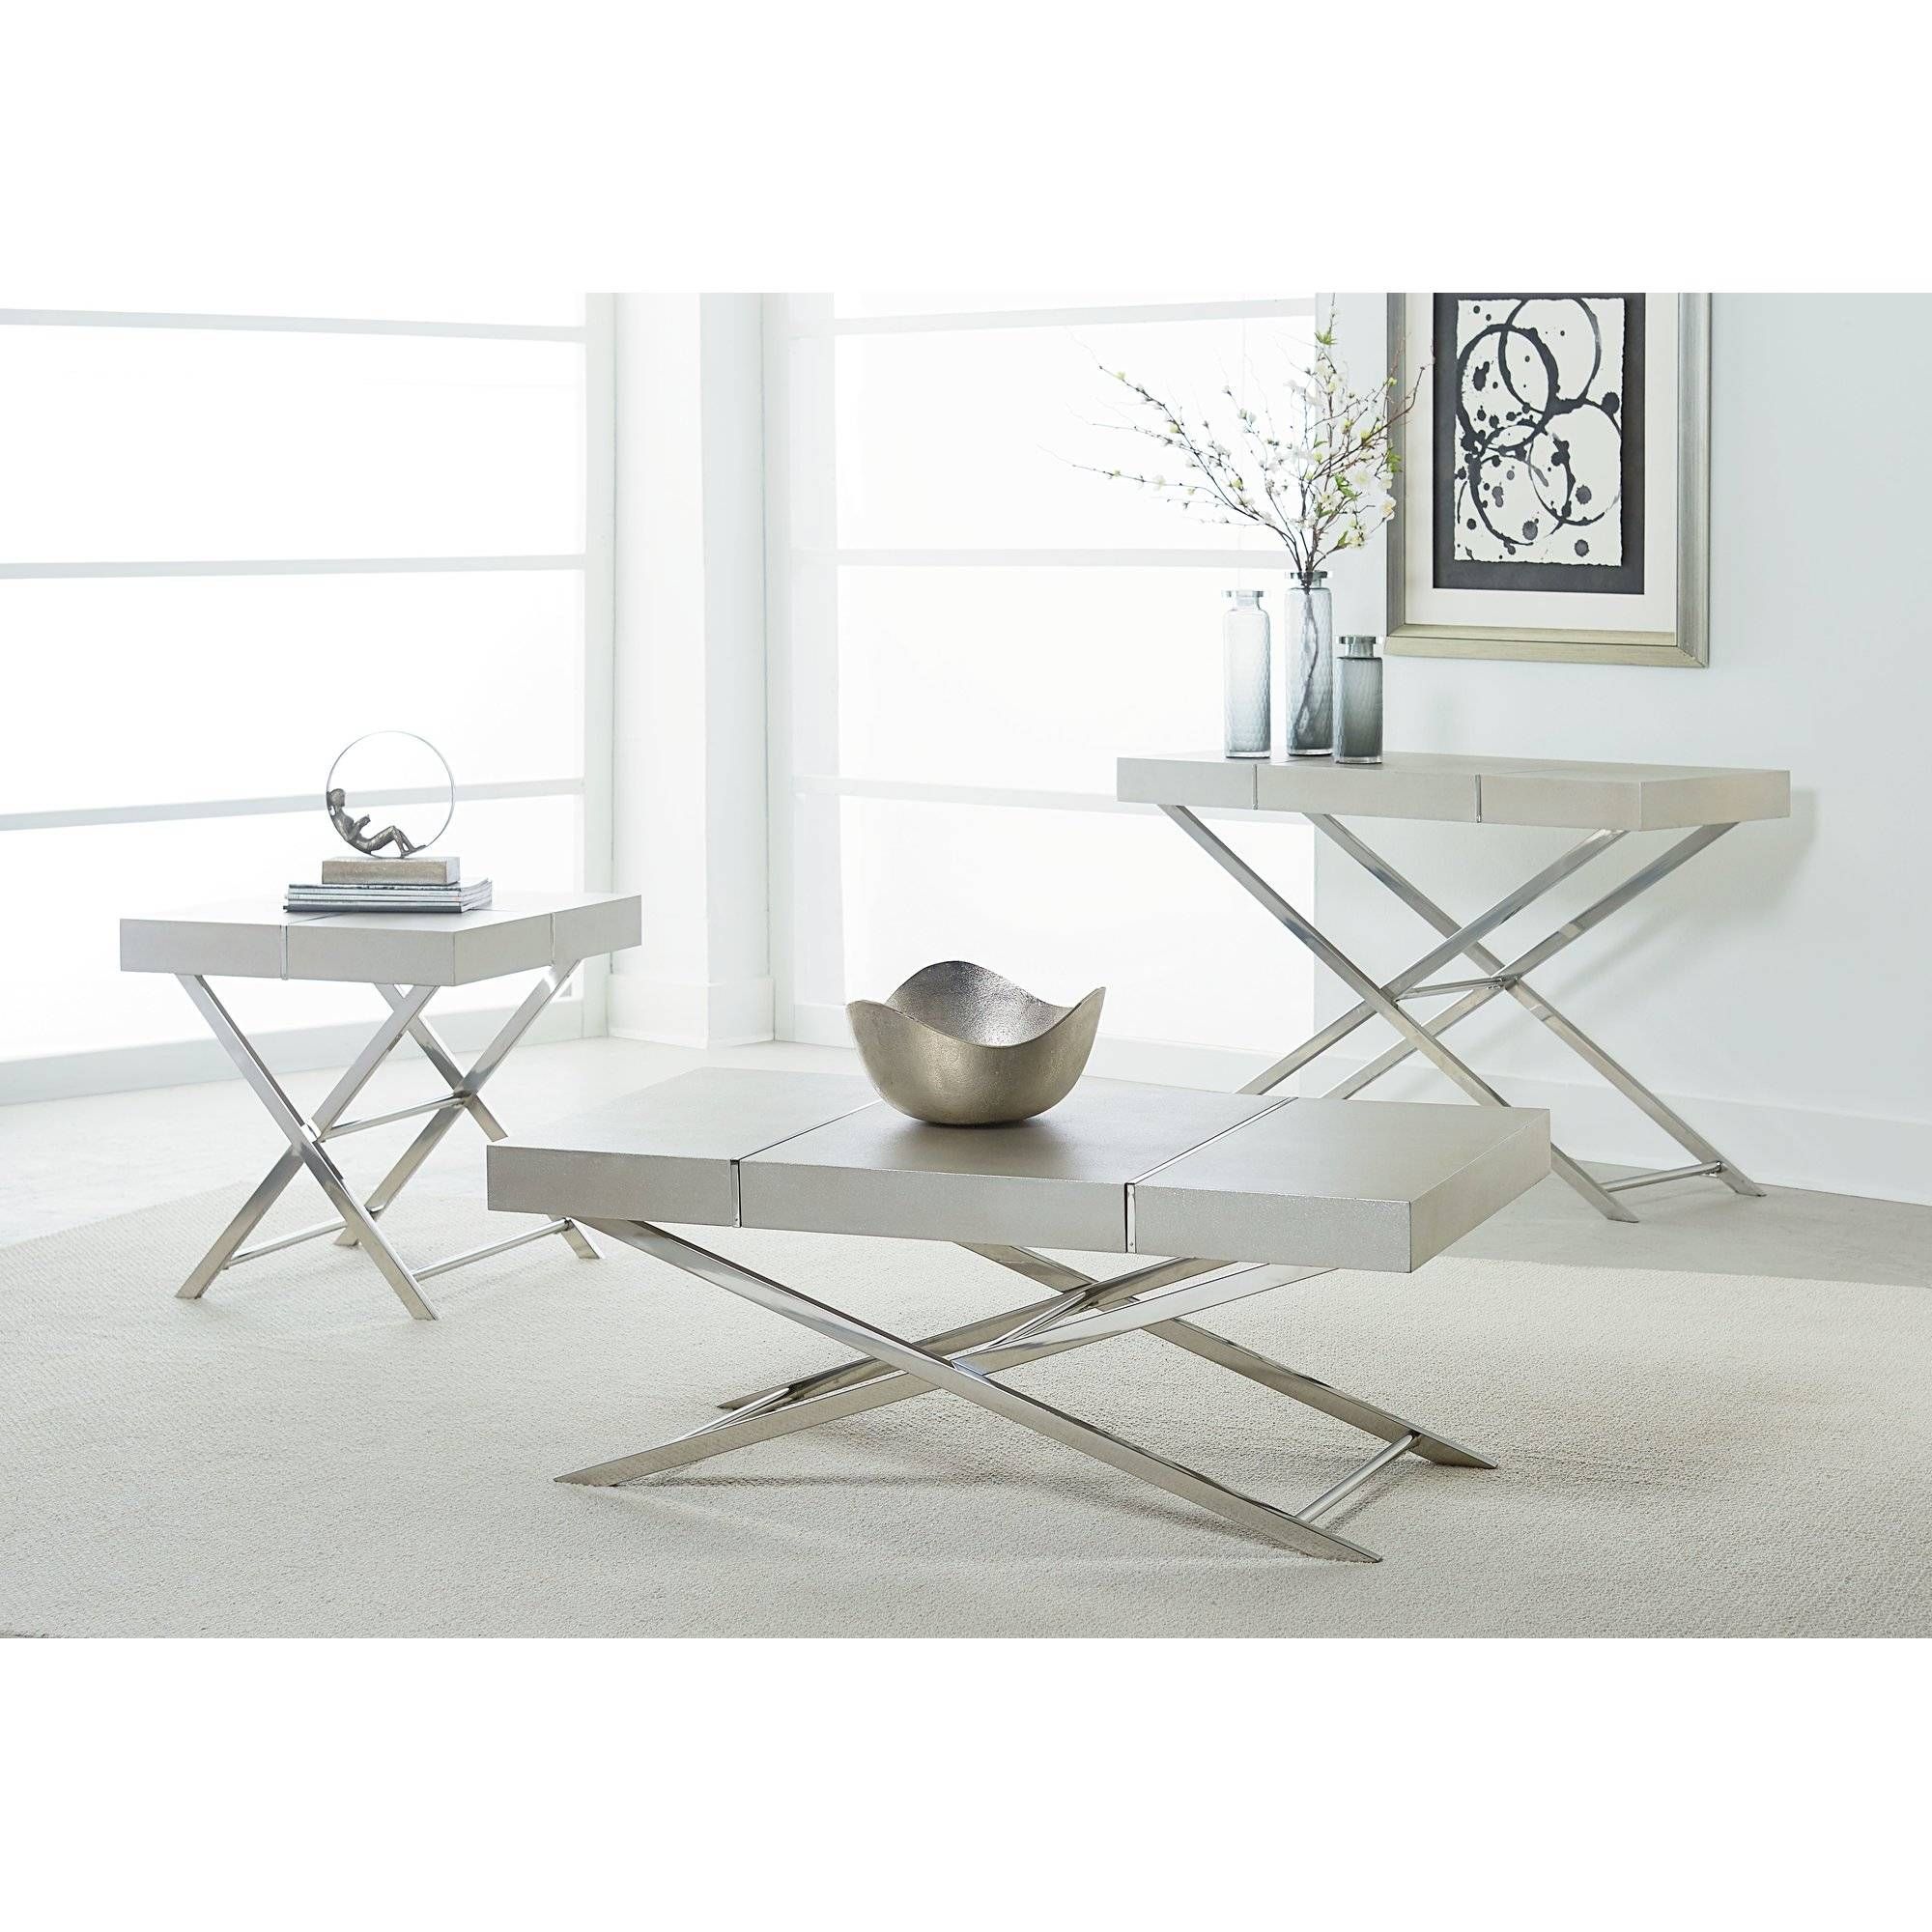 Standard Furniture Ava Coffee Table With Lift Top | Wayfair Supply Regarding Ava Coffee Tables (View 3 of 30)